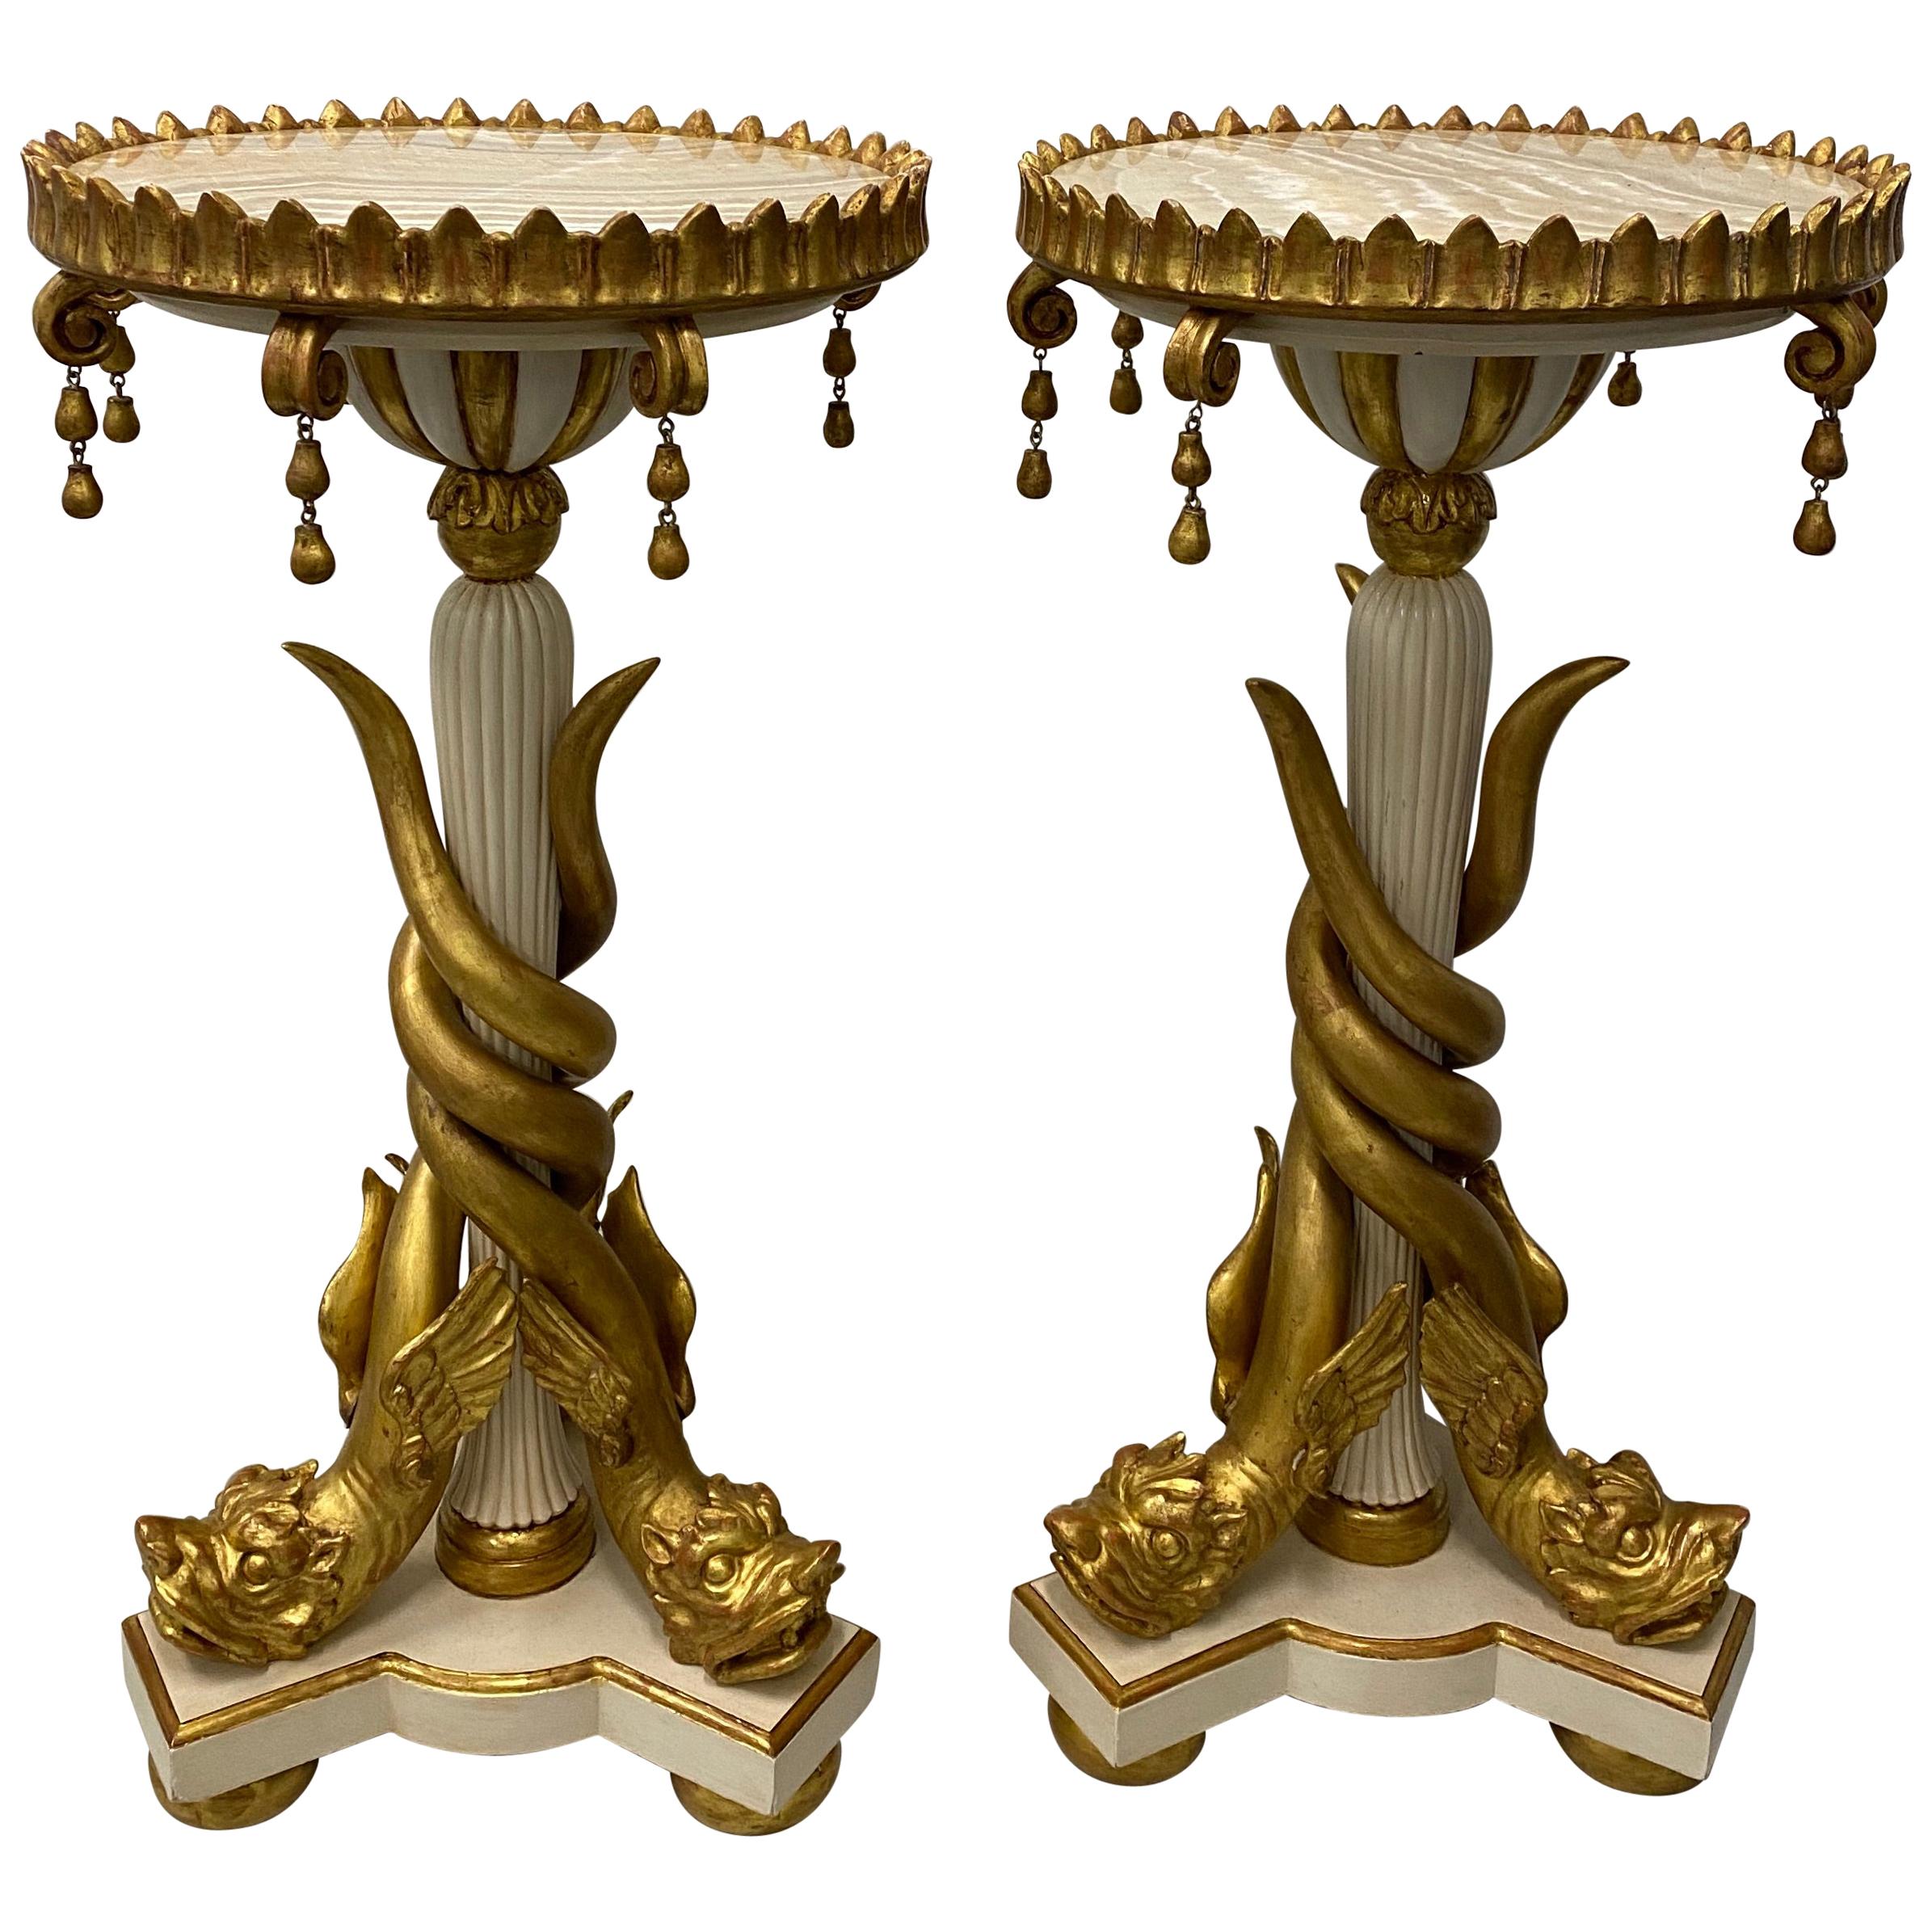 Matching Pair of Carved and Gilded Marble-Top Gueridon Stands, circa 1940